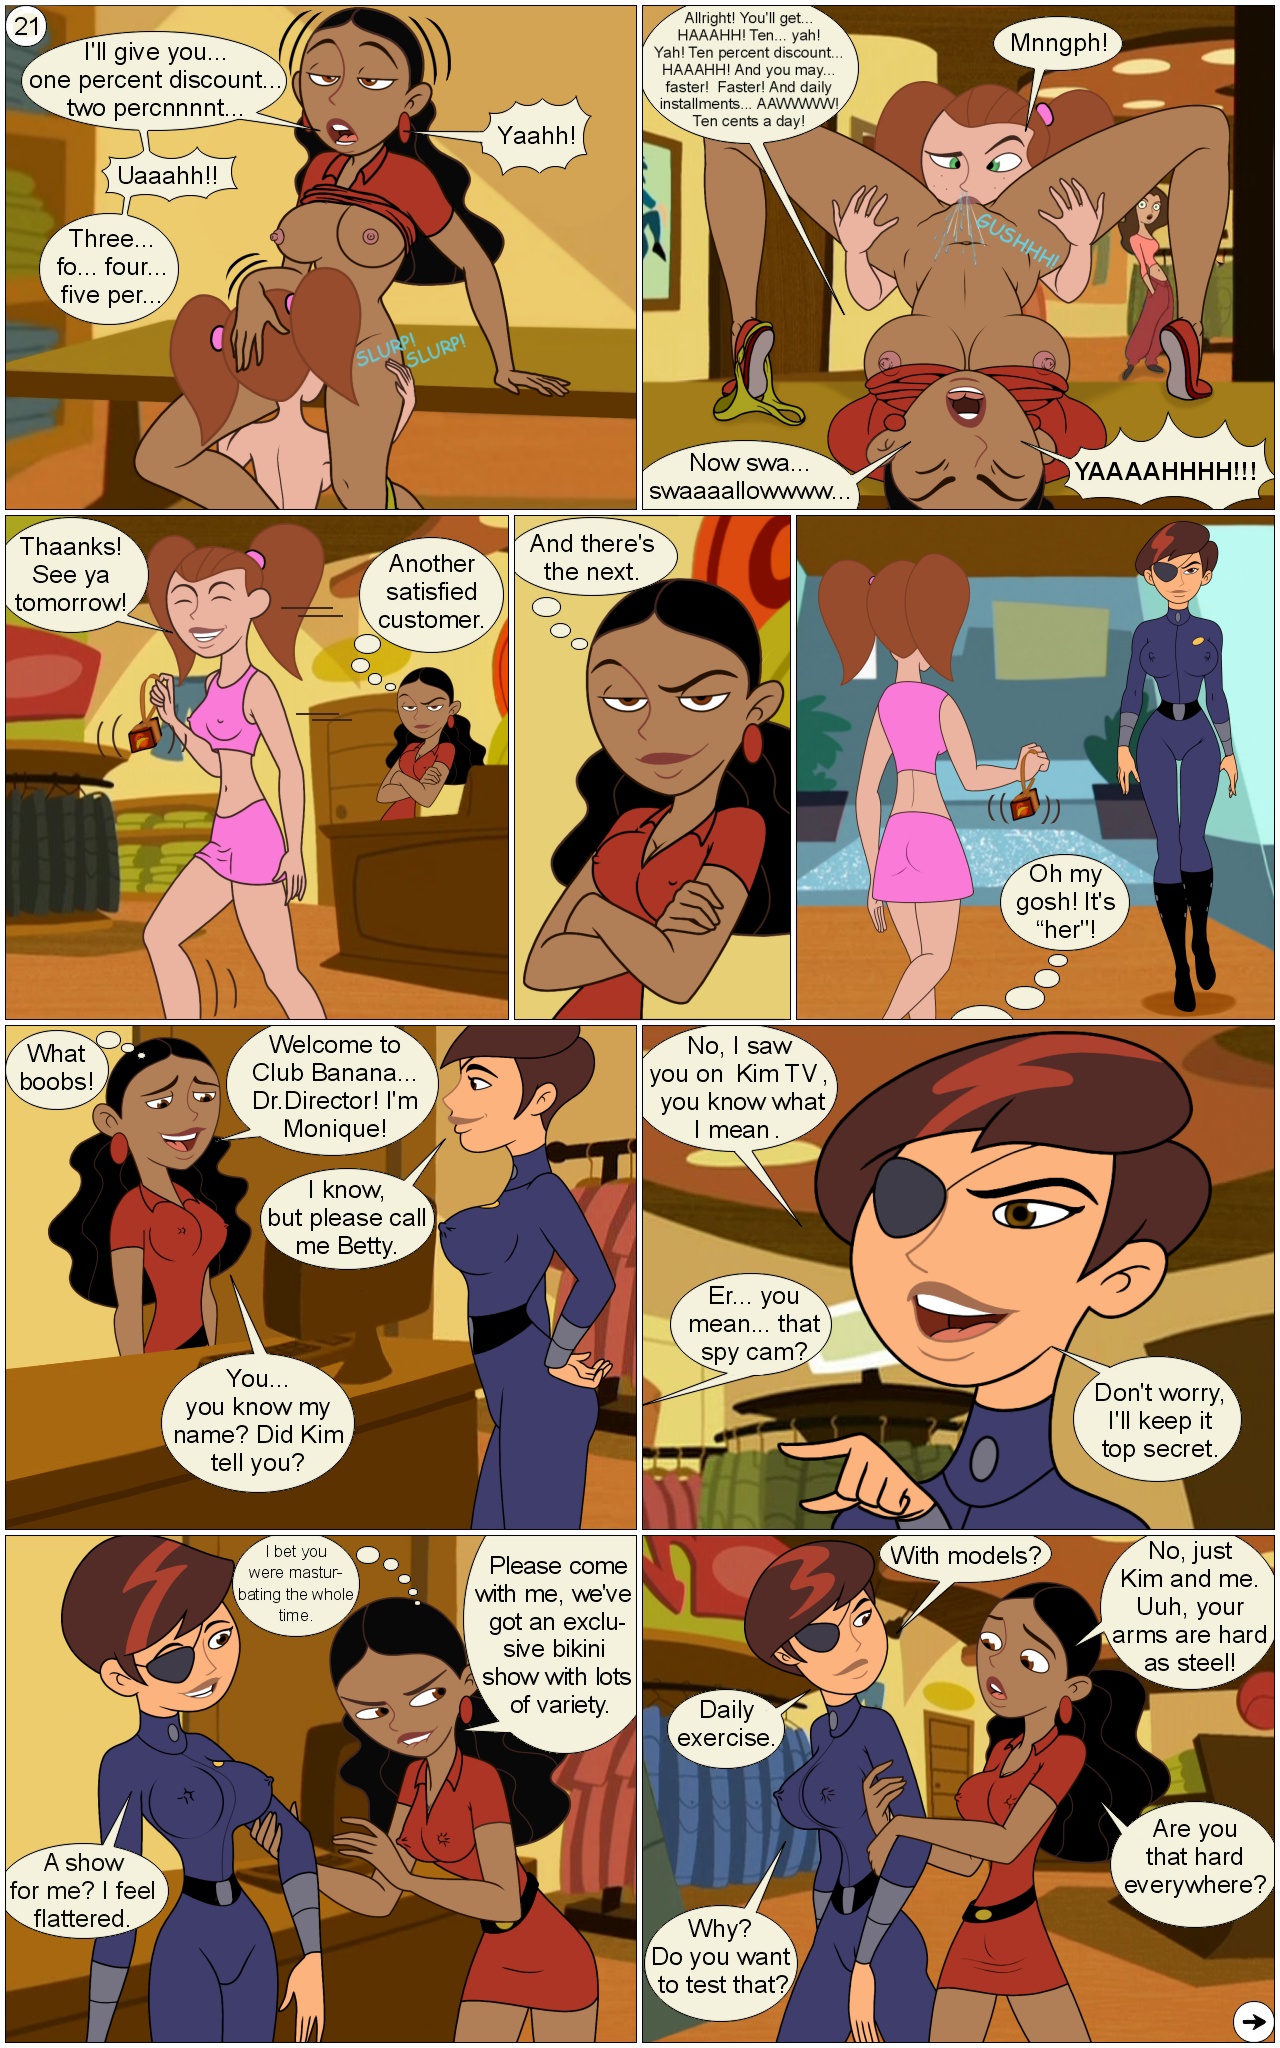 Oh, Betty! – Or: How to Seduce a Female Secret Agent (Kim Possible)